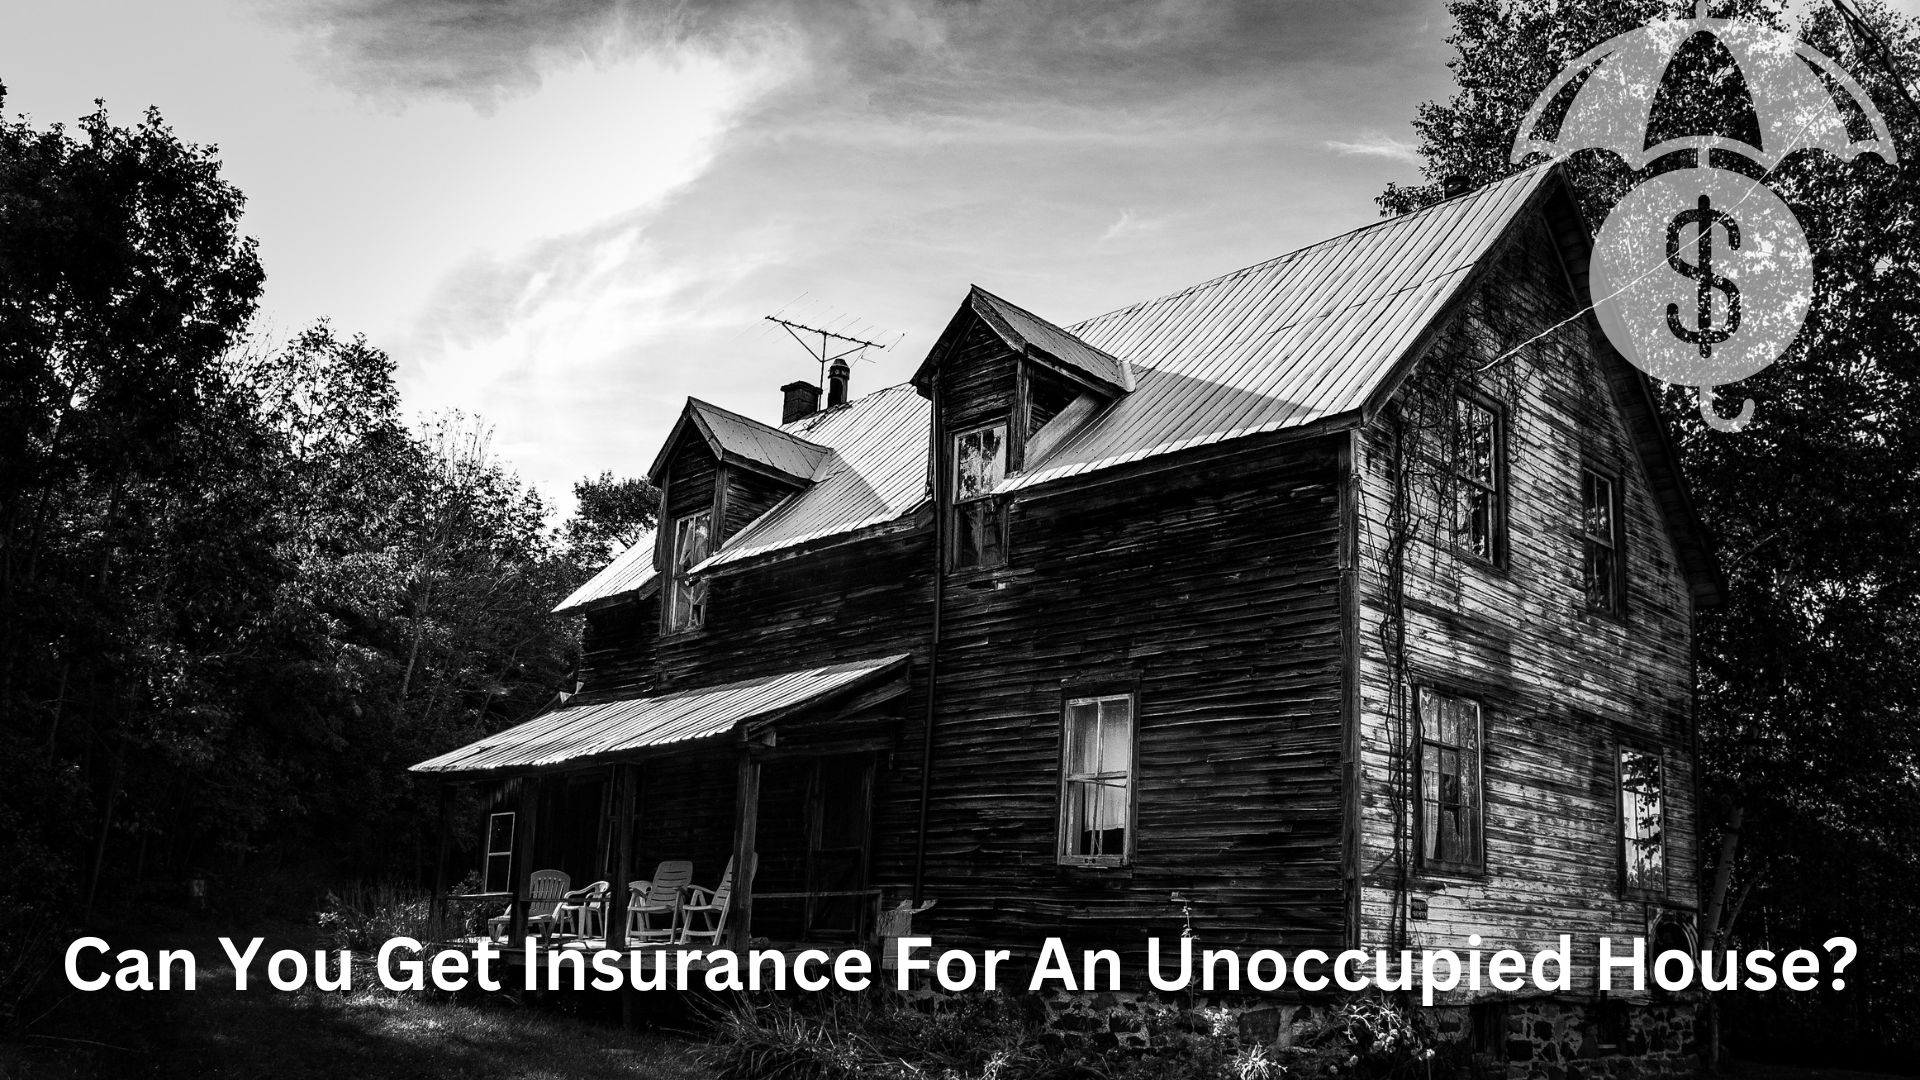 Can You Get Insurance For An Unoccupied House?